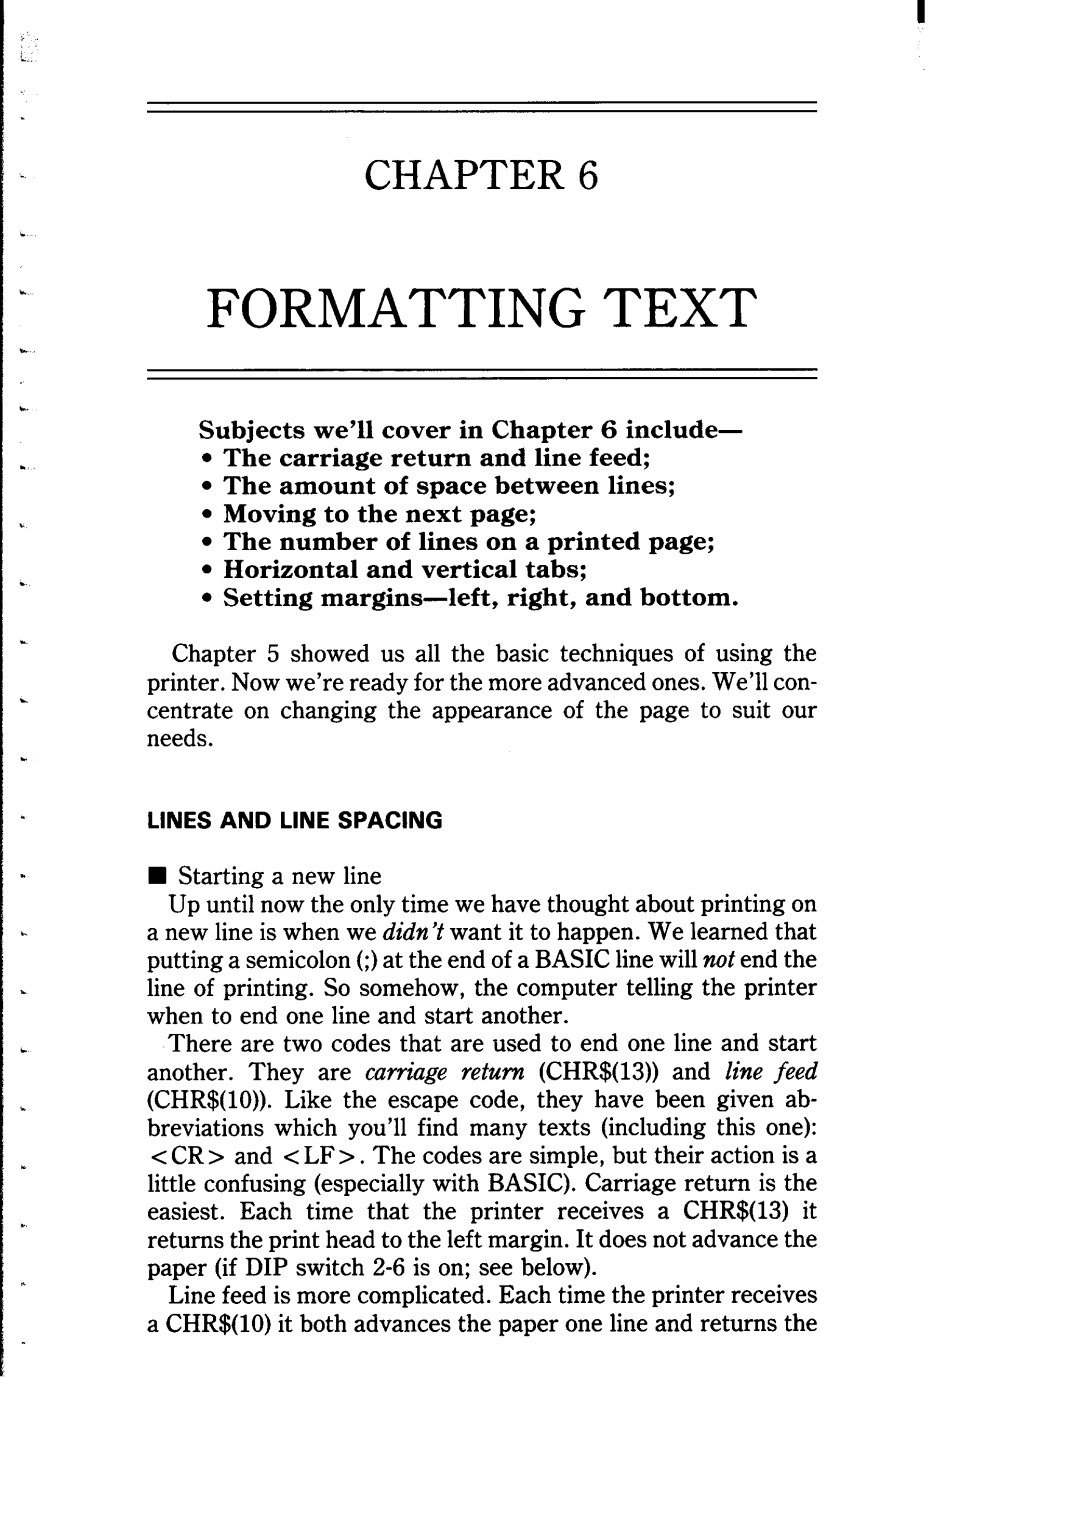 Star Micronics NB-15 user manual Chapter, Formatting Text, The amount of space between lines Moving to the next page 